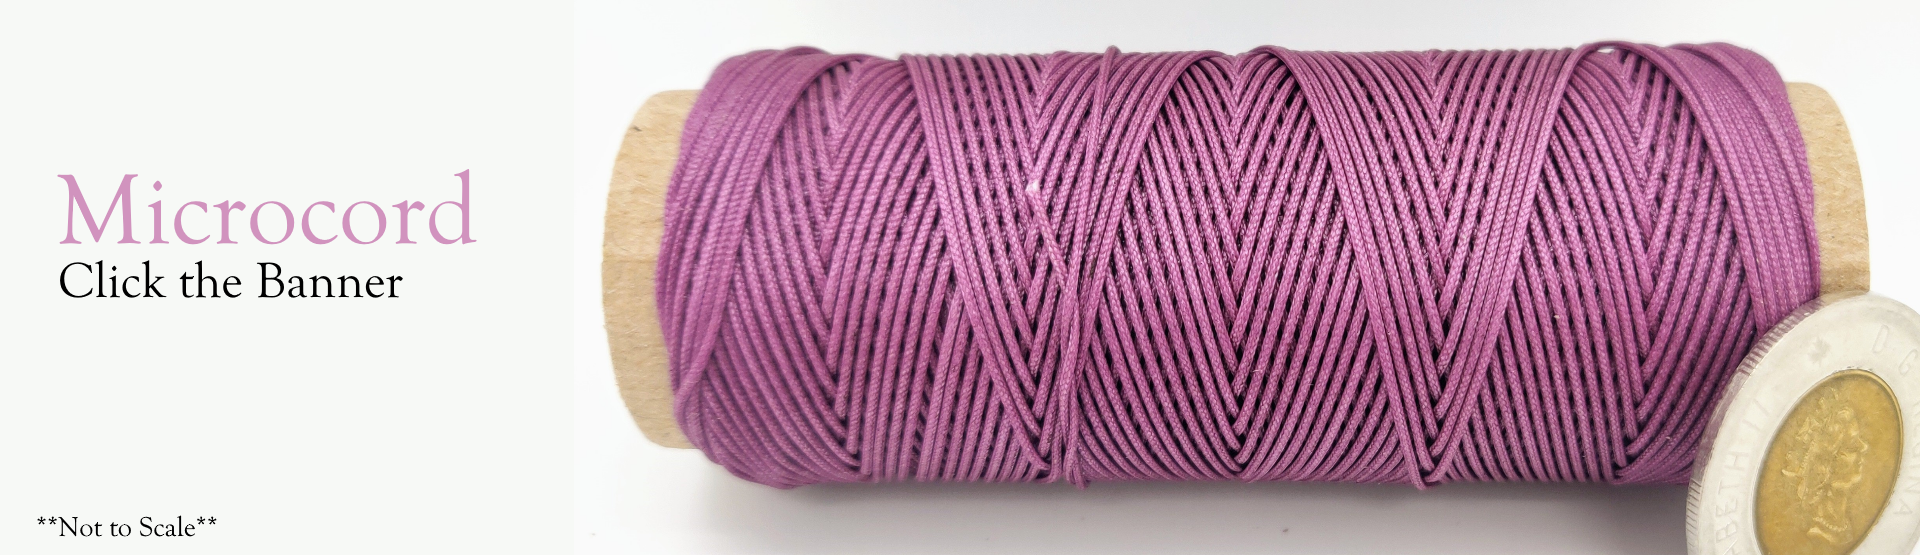 PARACORD PLANET 850 US Government Certified Paracord